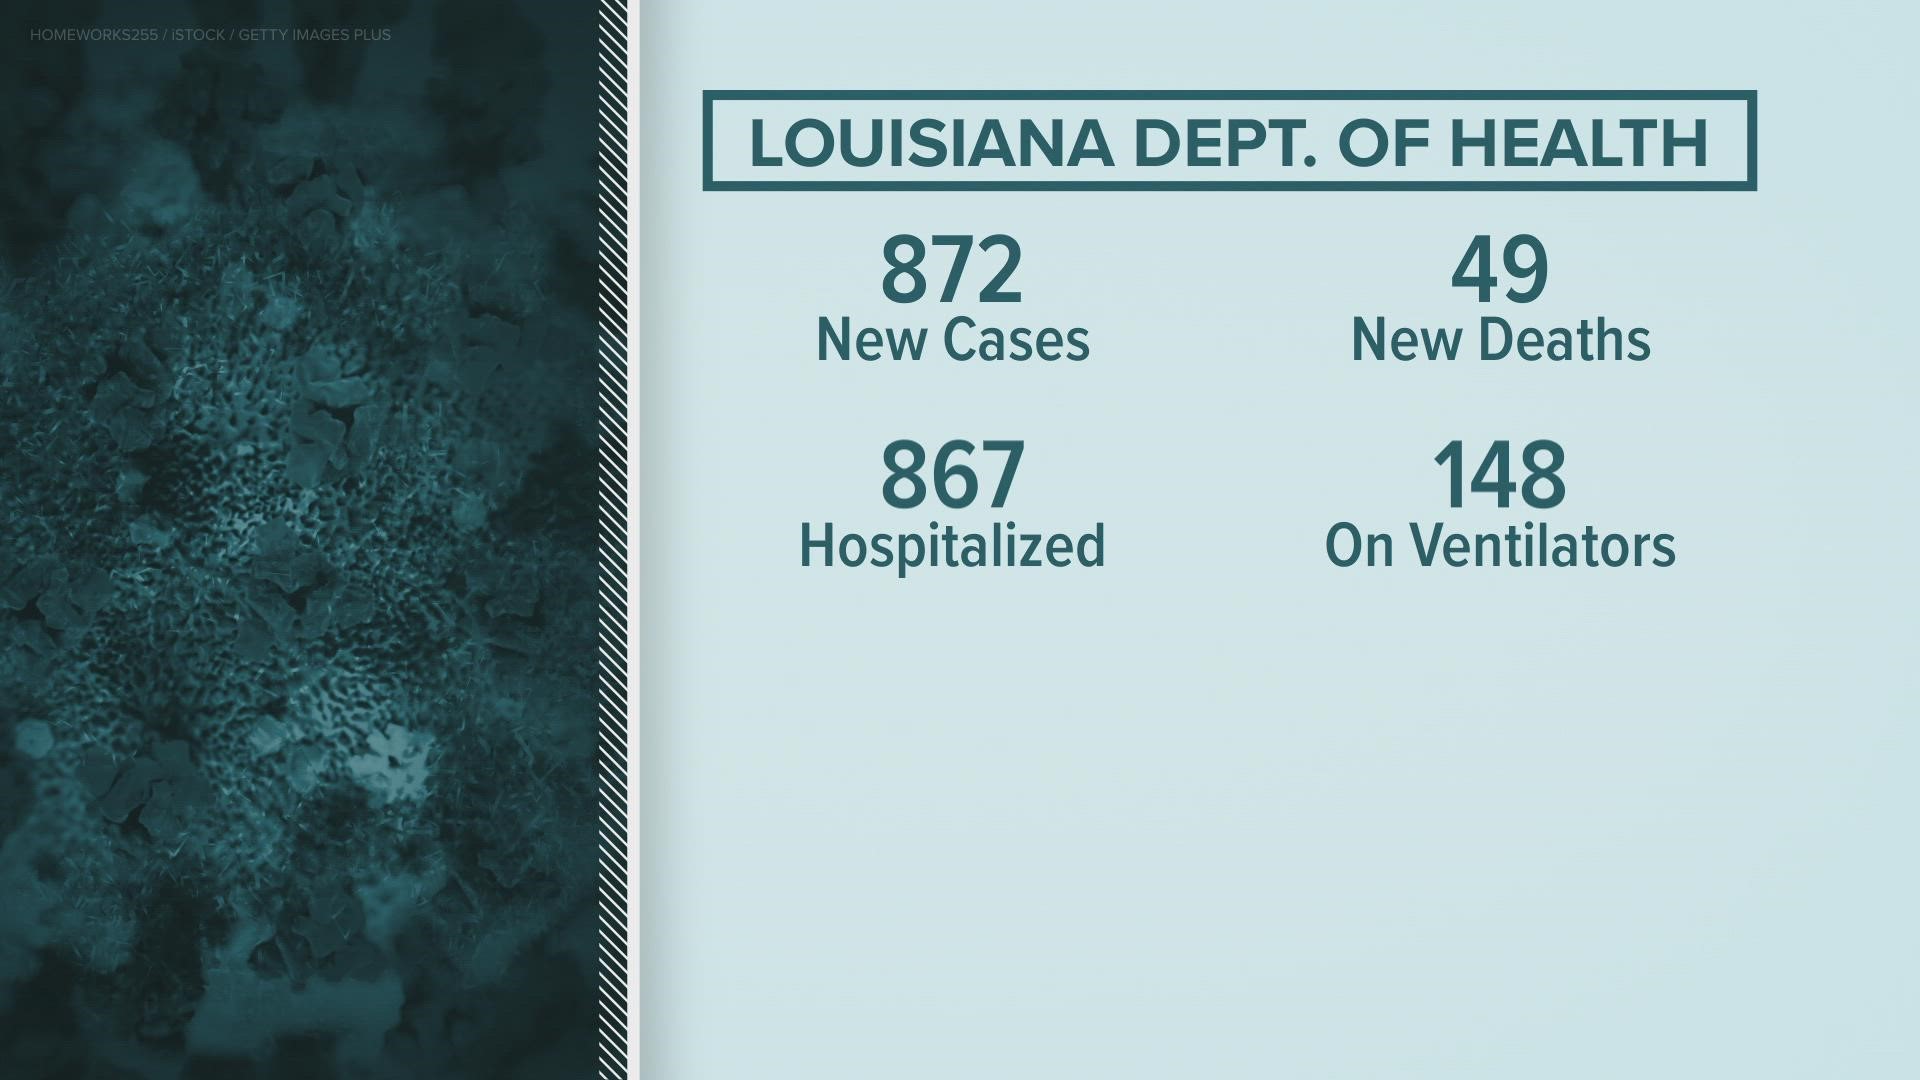 The Louisiana Dept. of Health reported 872 new COVID cases Thursday, 49 new deaths, and 867 hospitalizations.